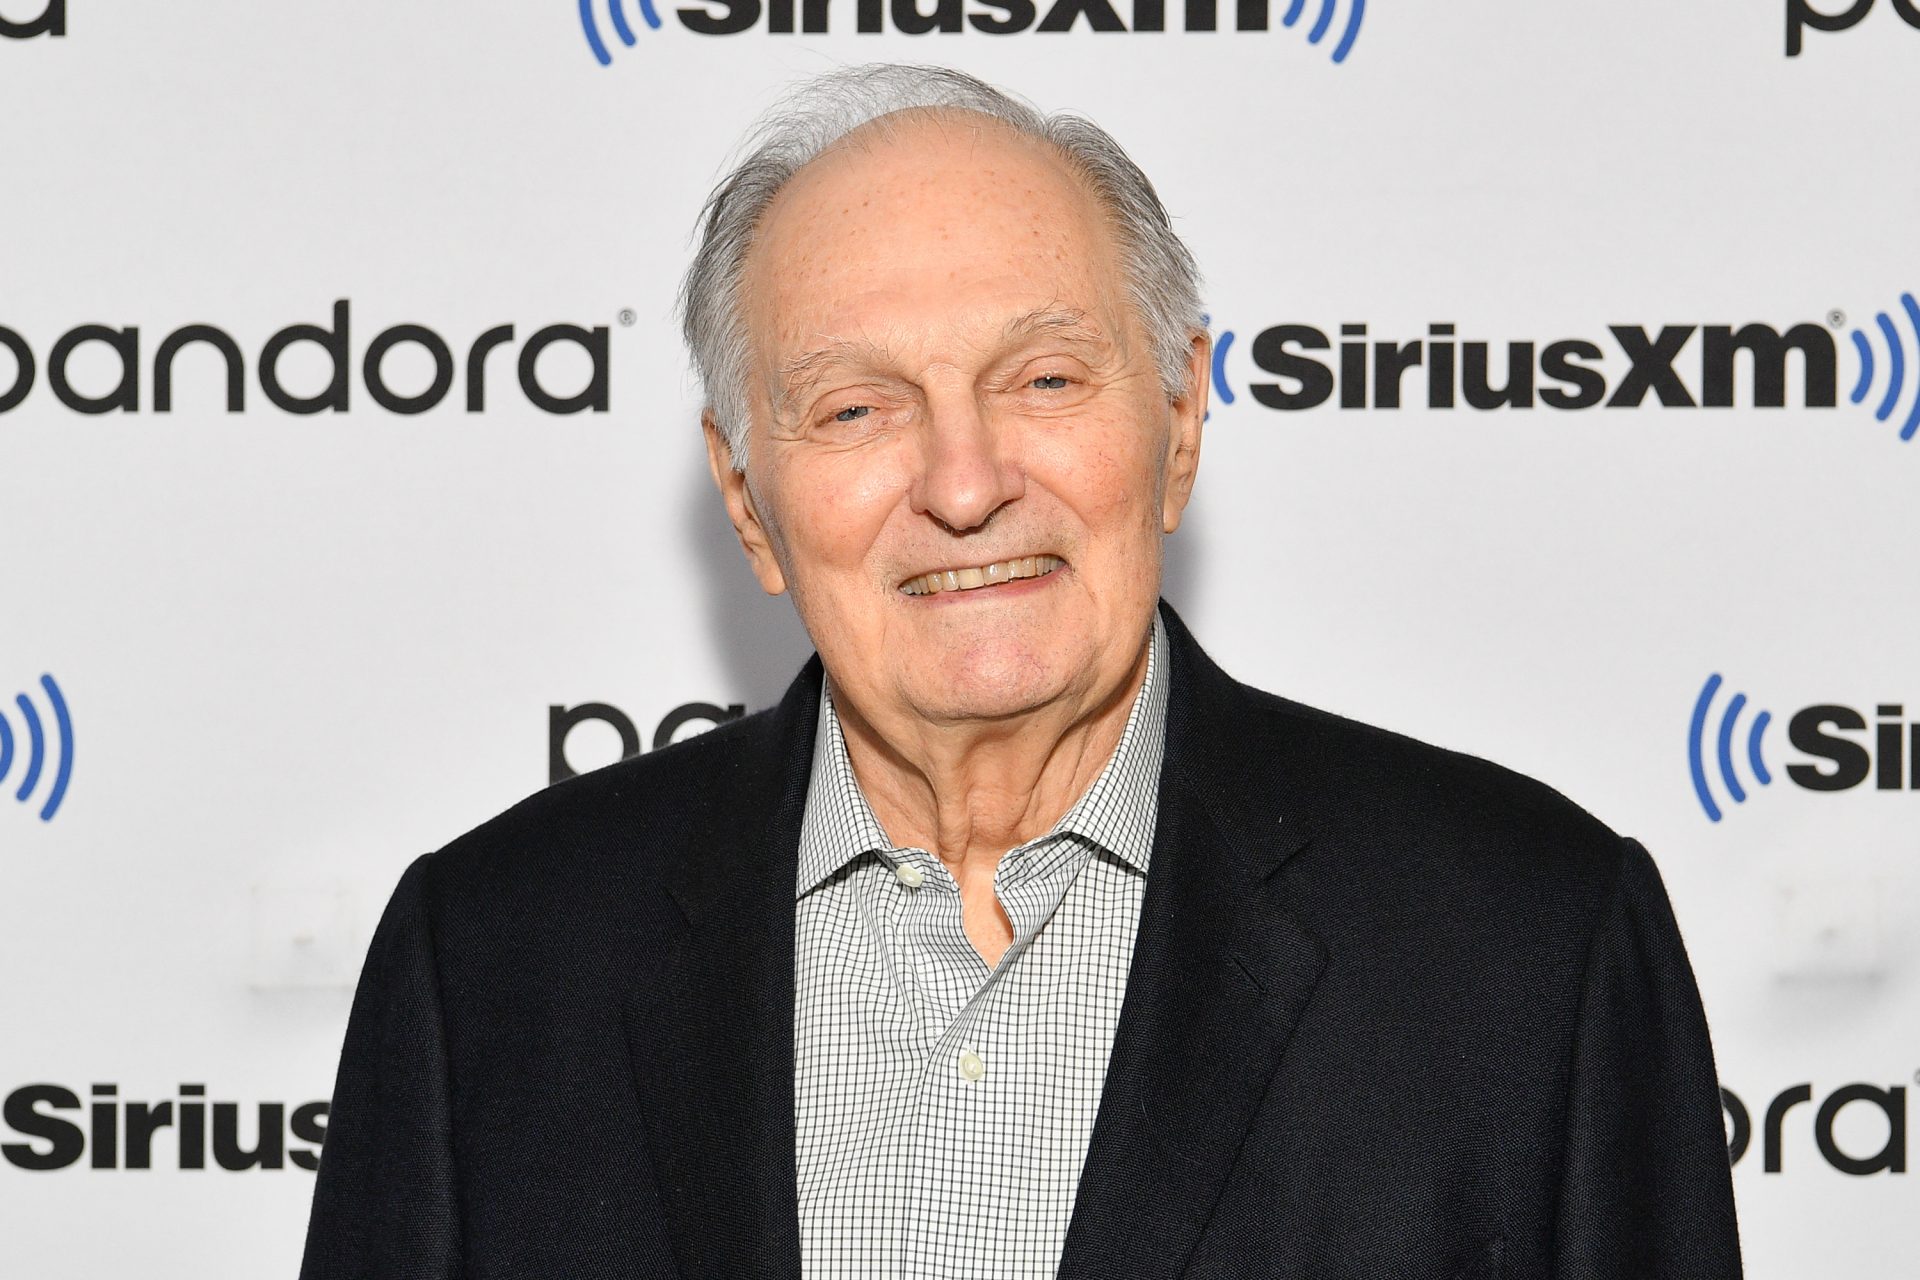 Currently, Alda devotes much of his time to podcasting